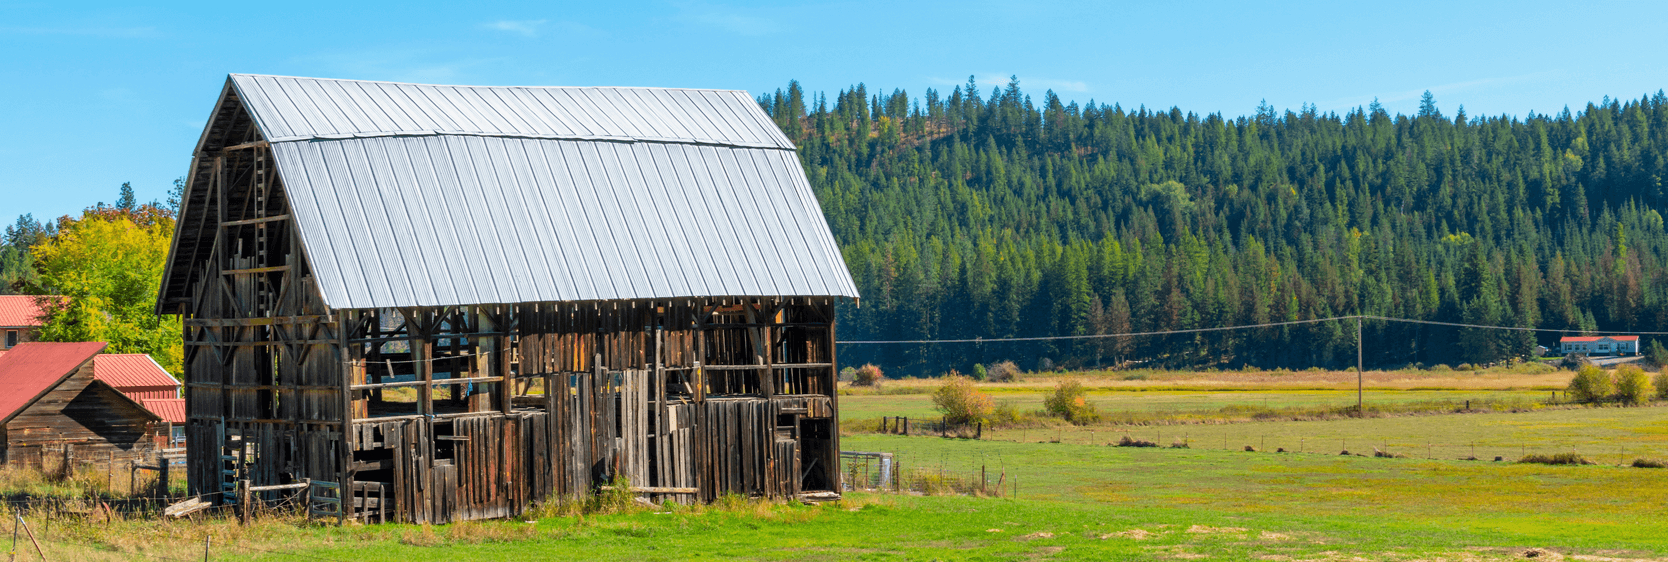  vintage rustic barn with metal roof in the rural mountain town of Athol, in the Coeur d'Alene, Idaho area